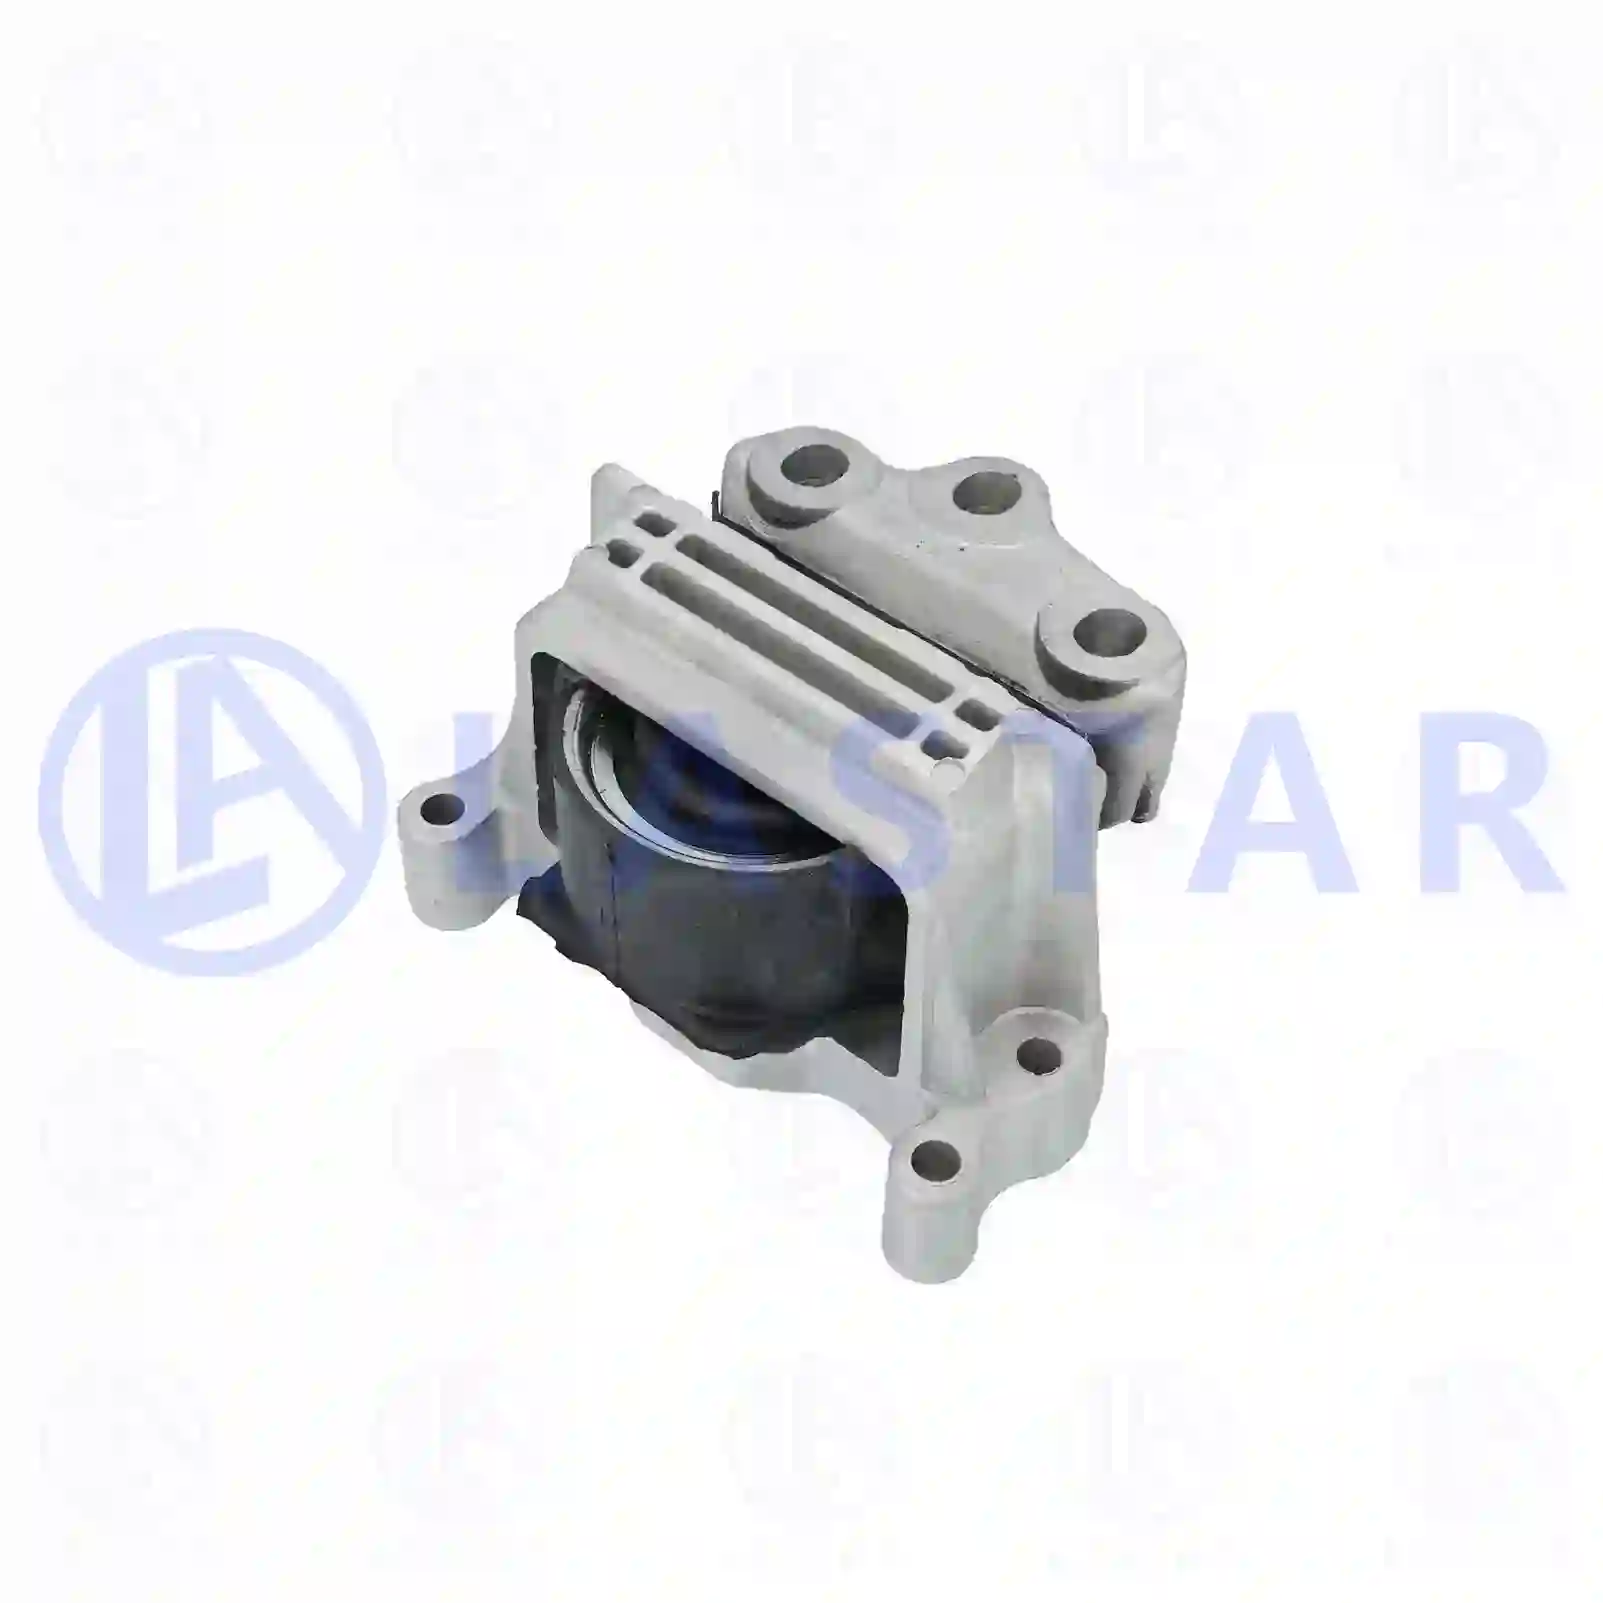 Engine mounting, 77700977, 1377905, 1384138, 6C11-6F012-AA, 6C11-6F012-AB ||  77700977 Lastar Spare Part | Truck Spare Parts, Auotomotive Spare Parts Engine mounting, 77700977, 1377905, 1384138, 6C11-6F012-AA, 6C11-6F012-AB ||  77700977 Lastar Spare Part | Truck Spare Parts, Auotomotive Spare Parts